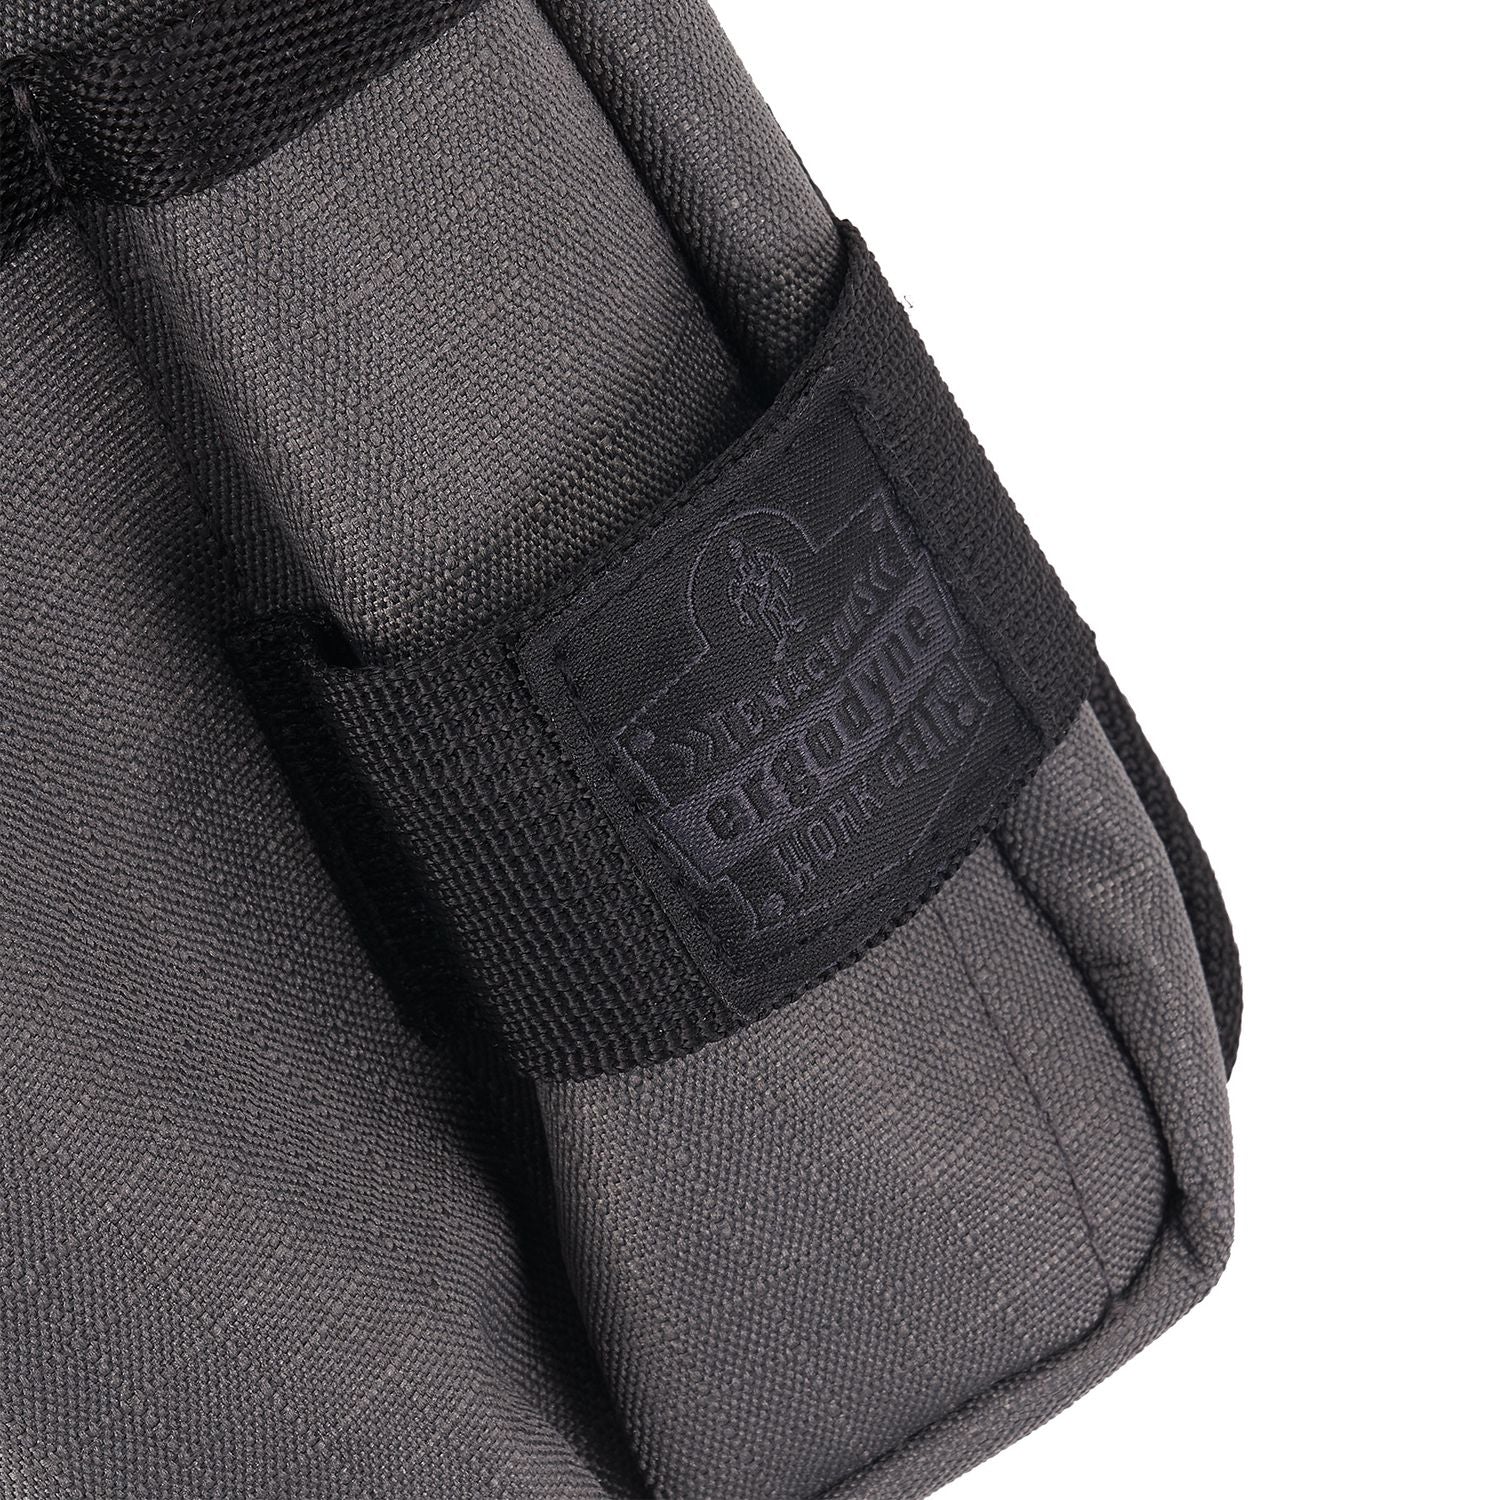 arsenal-5568-belt-loop-tool-pouch-w-device-holster-4-compartments-5-x-2-x-85-polyester-gray-ships-in-1-3-business-days_ego13668 - 5